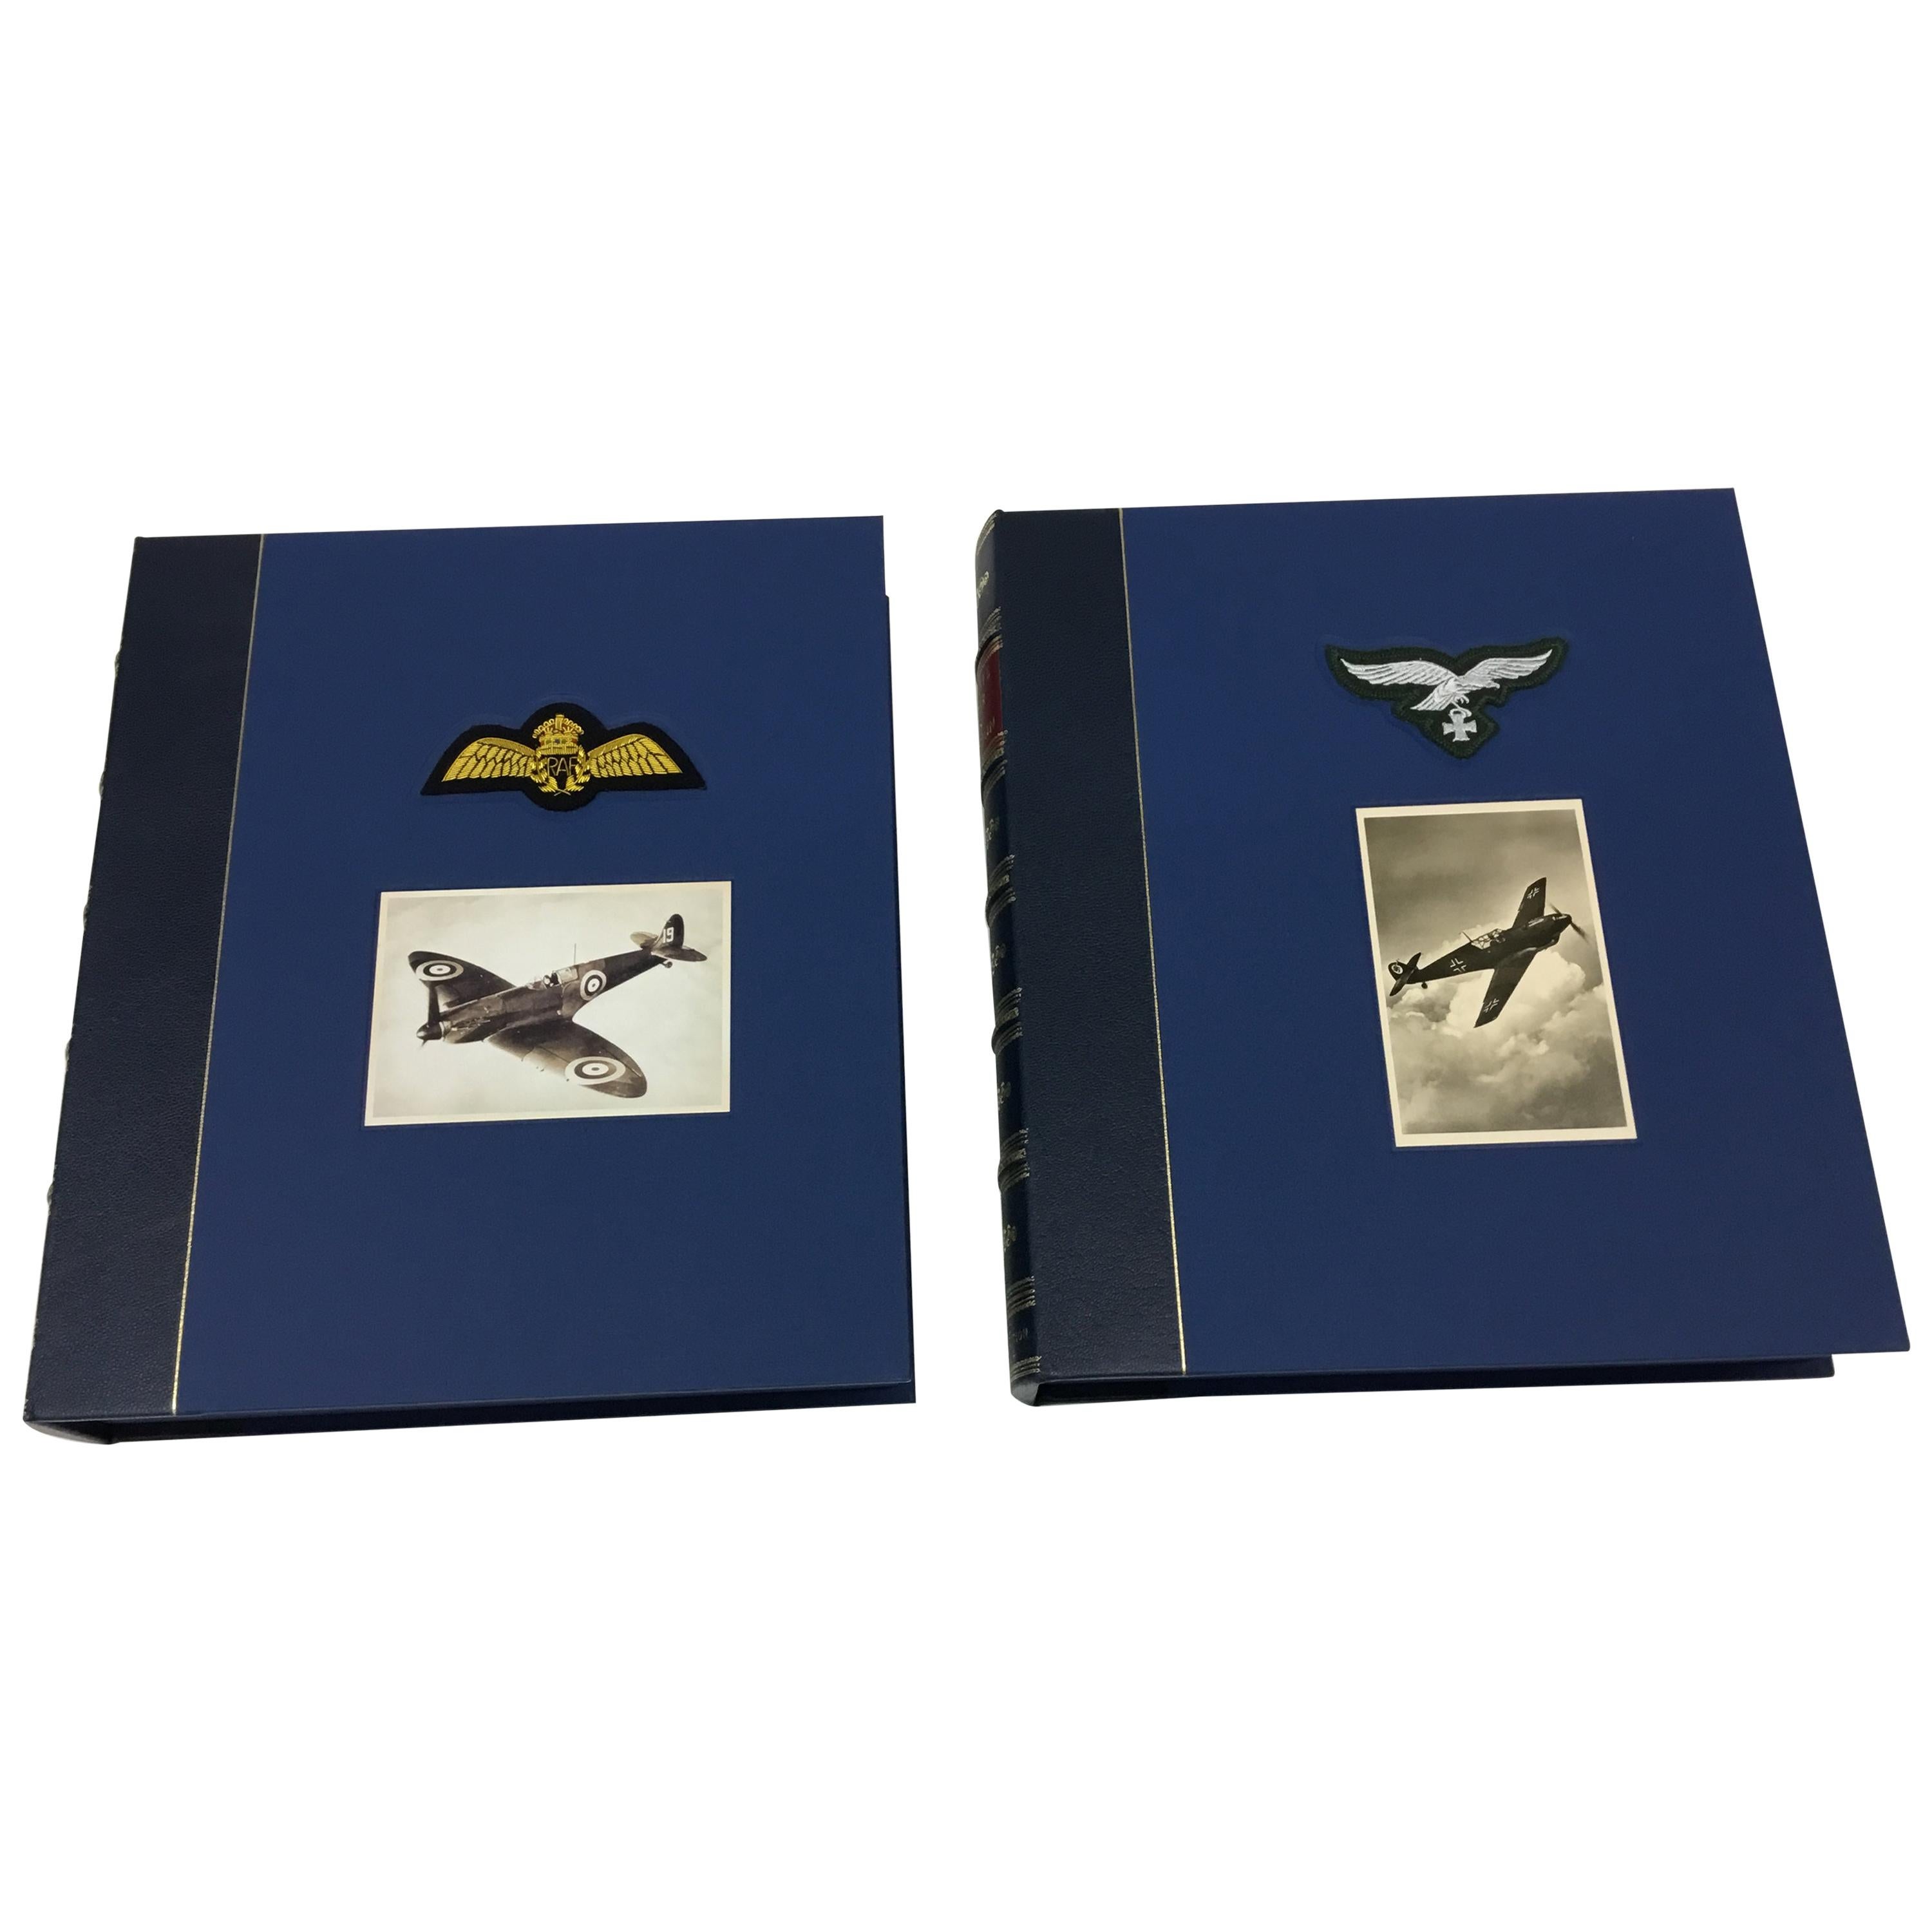 Battle of Britain Fighter Aces Collection, Signed Limited Edition, Two-Volumes